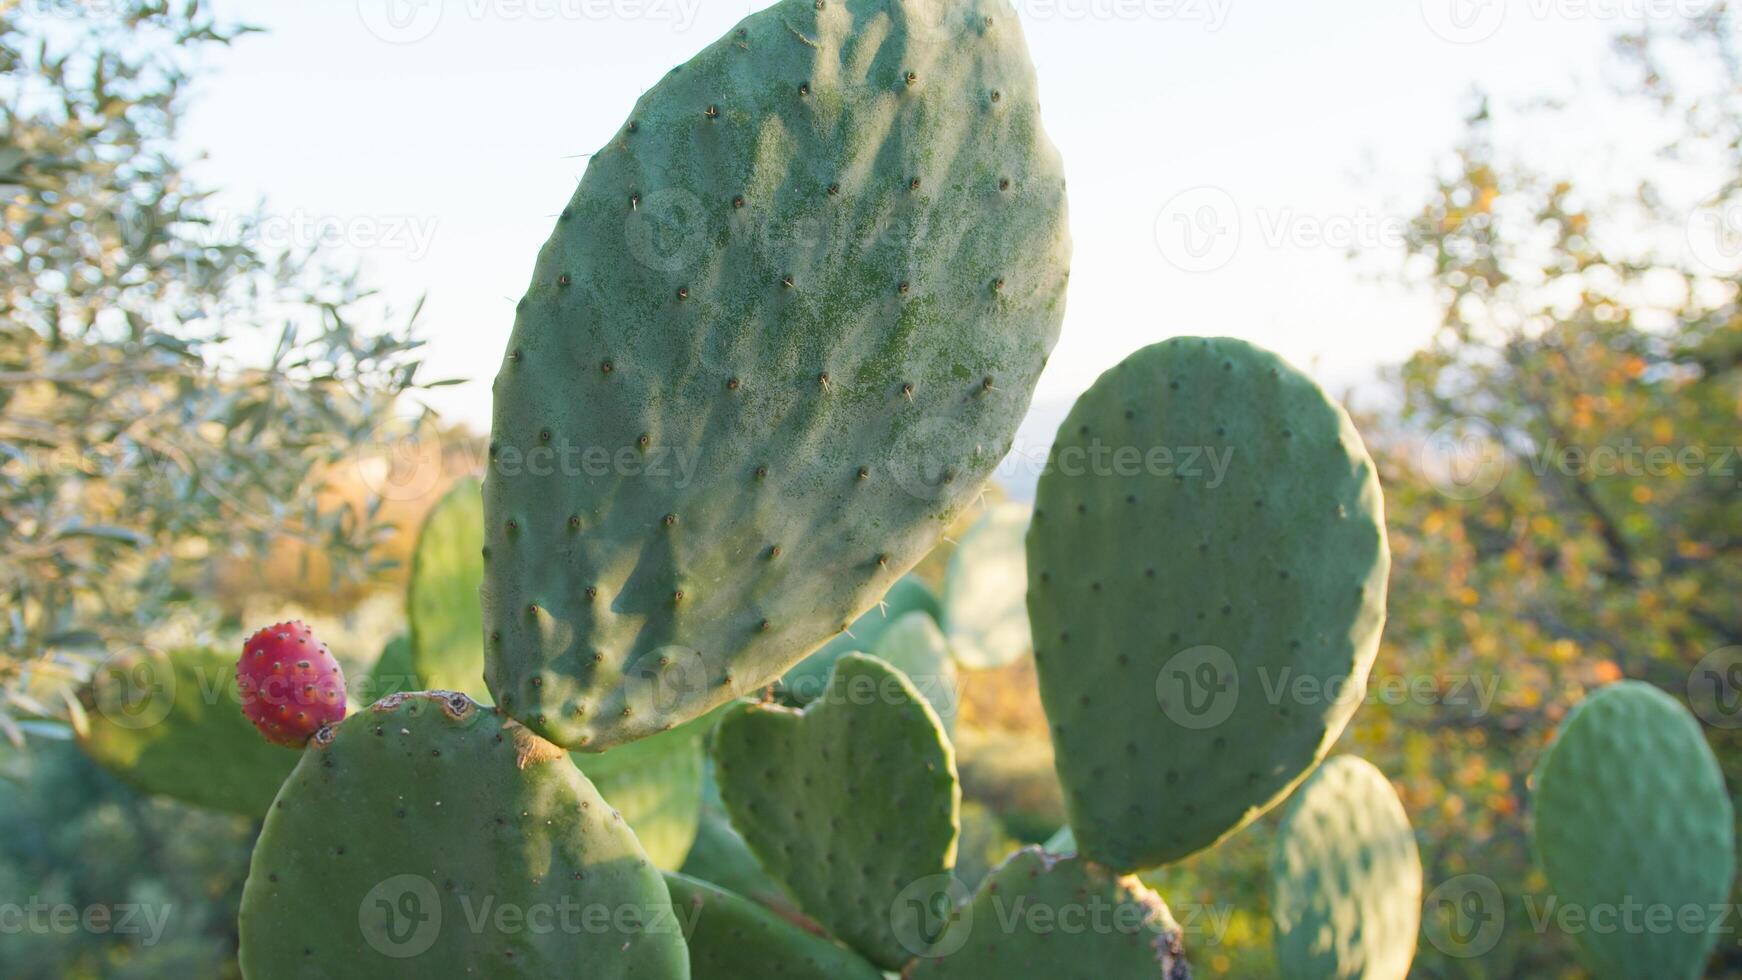 Prickly Pear Plant In Sicily Countryside photo